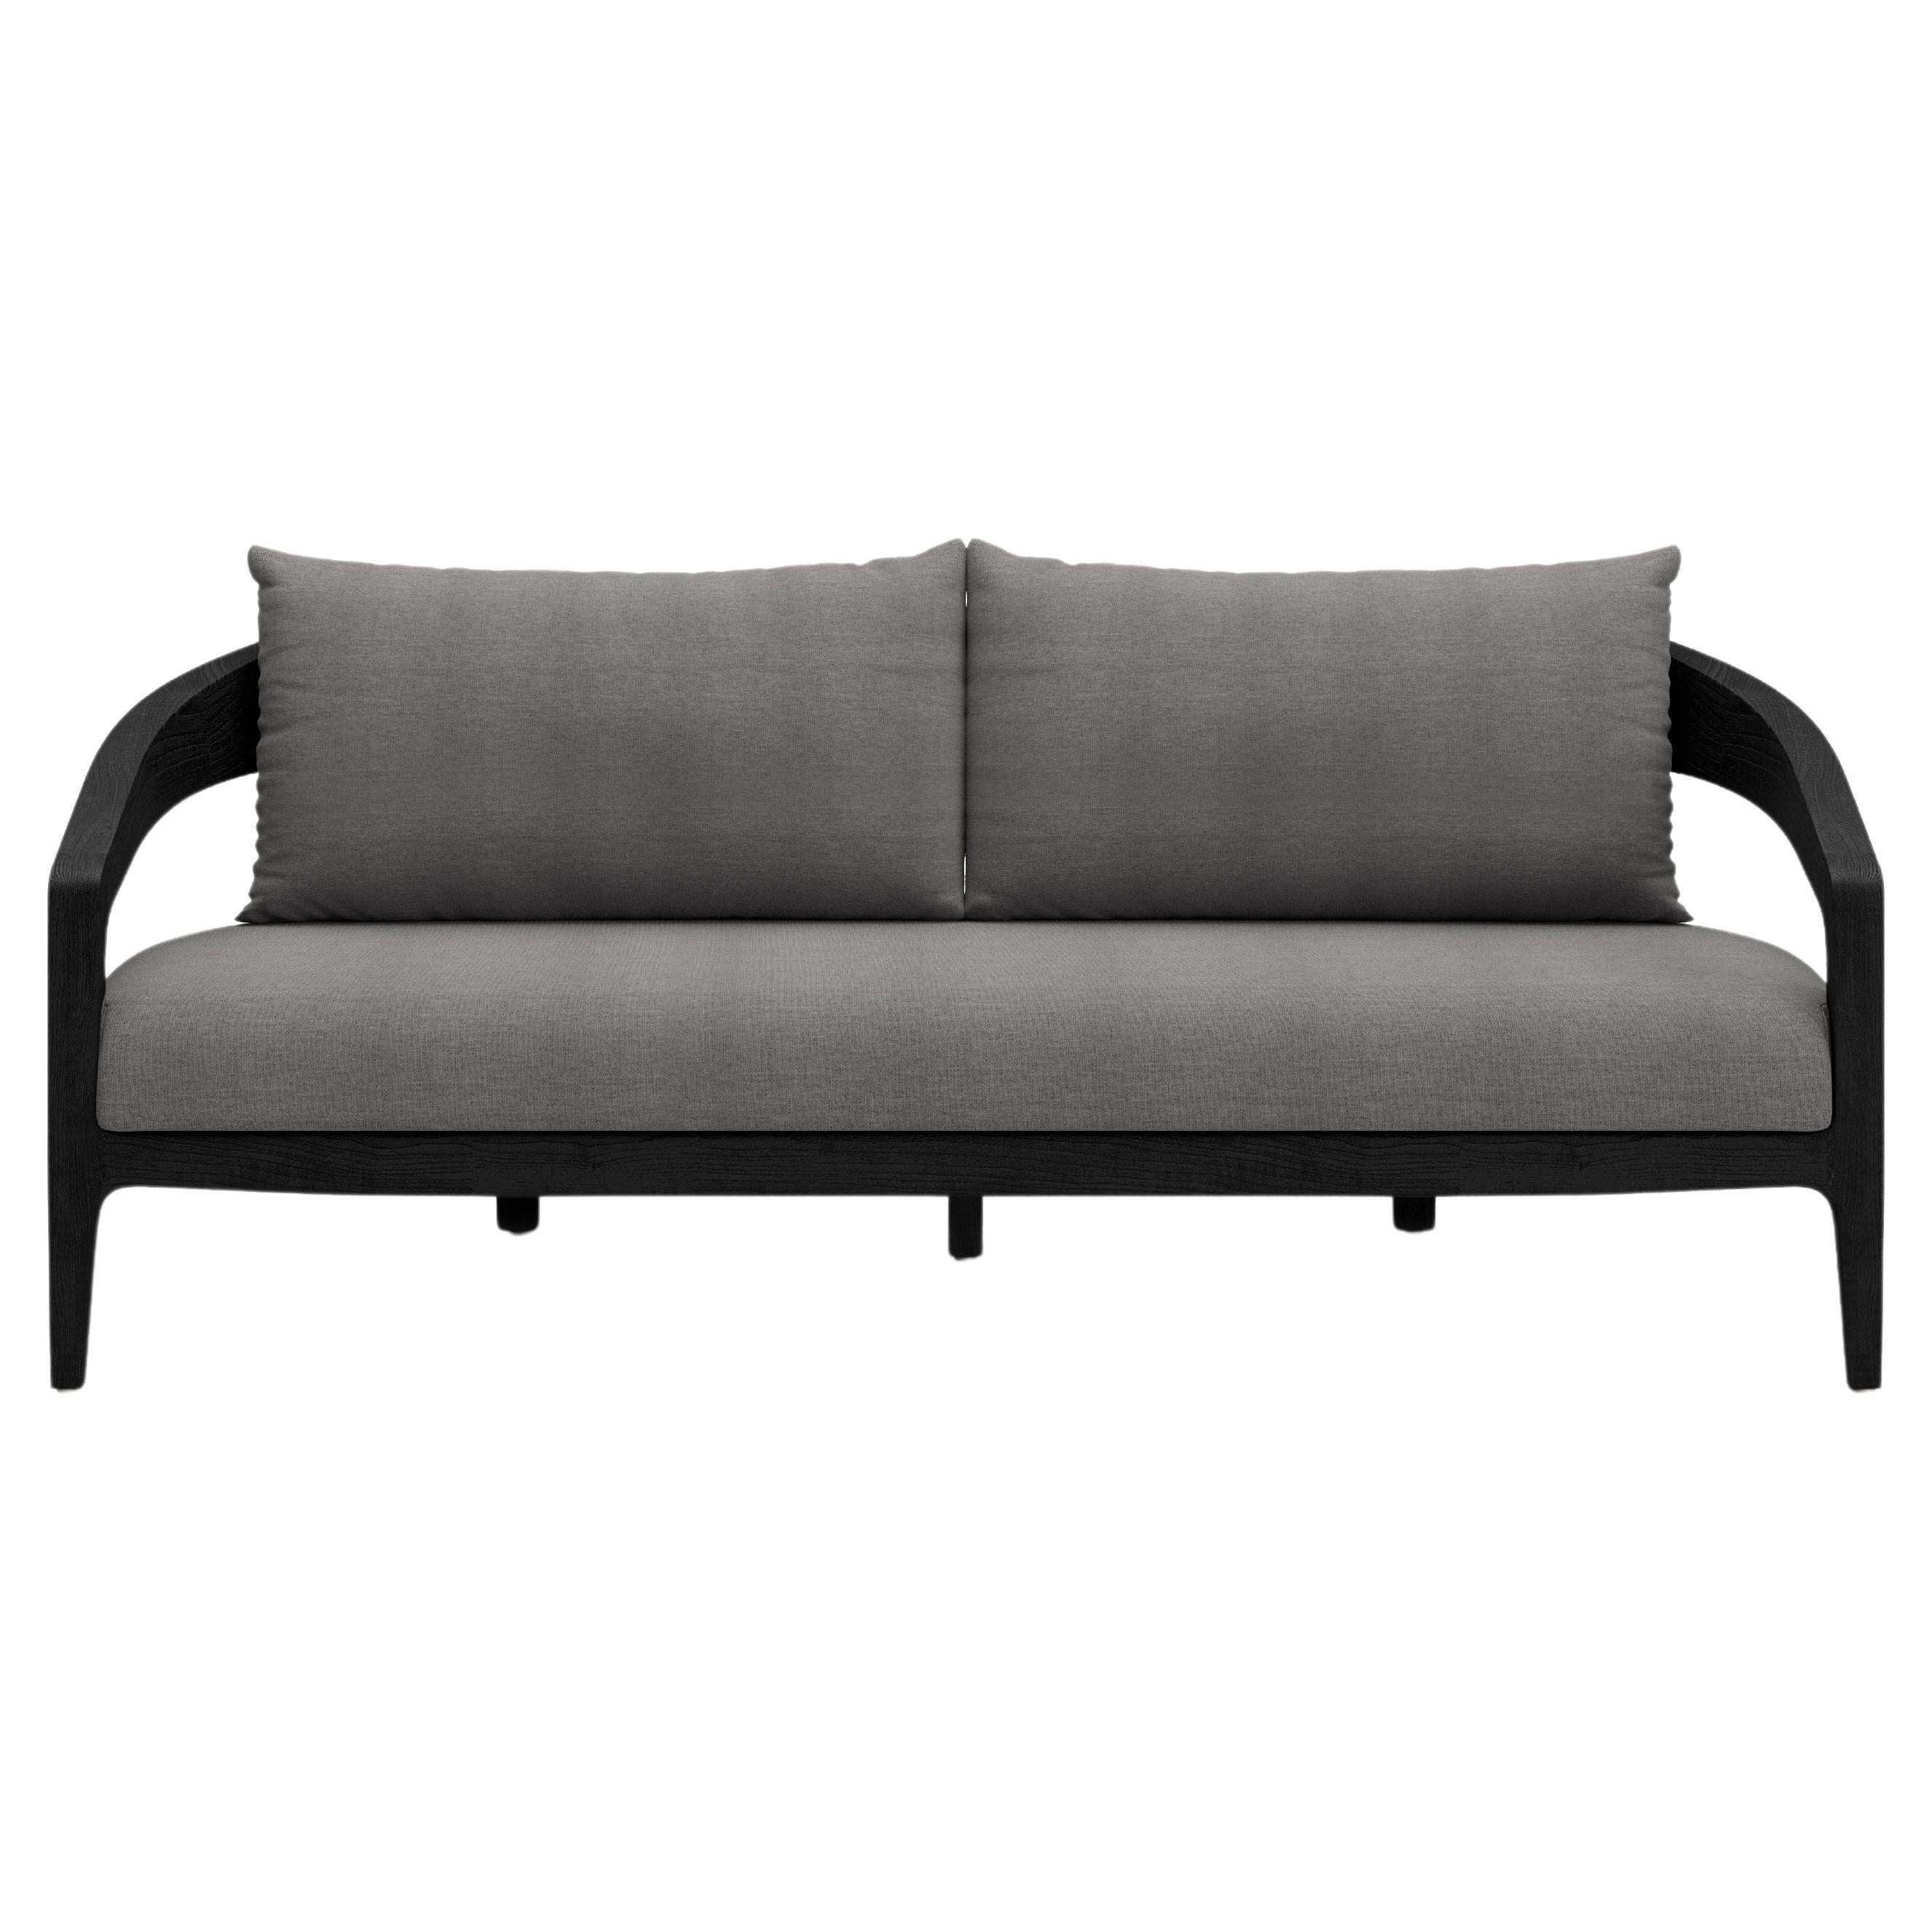 Whale-noche Outdoor 2 Seater Sofa by SNOC